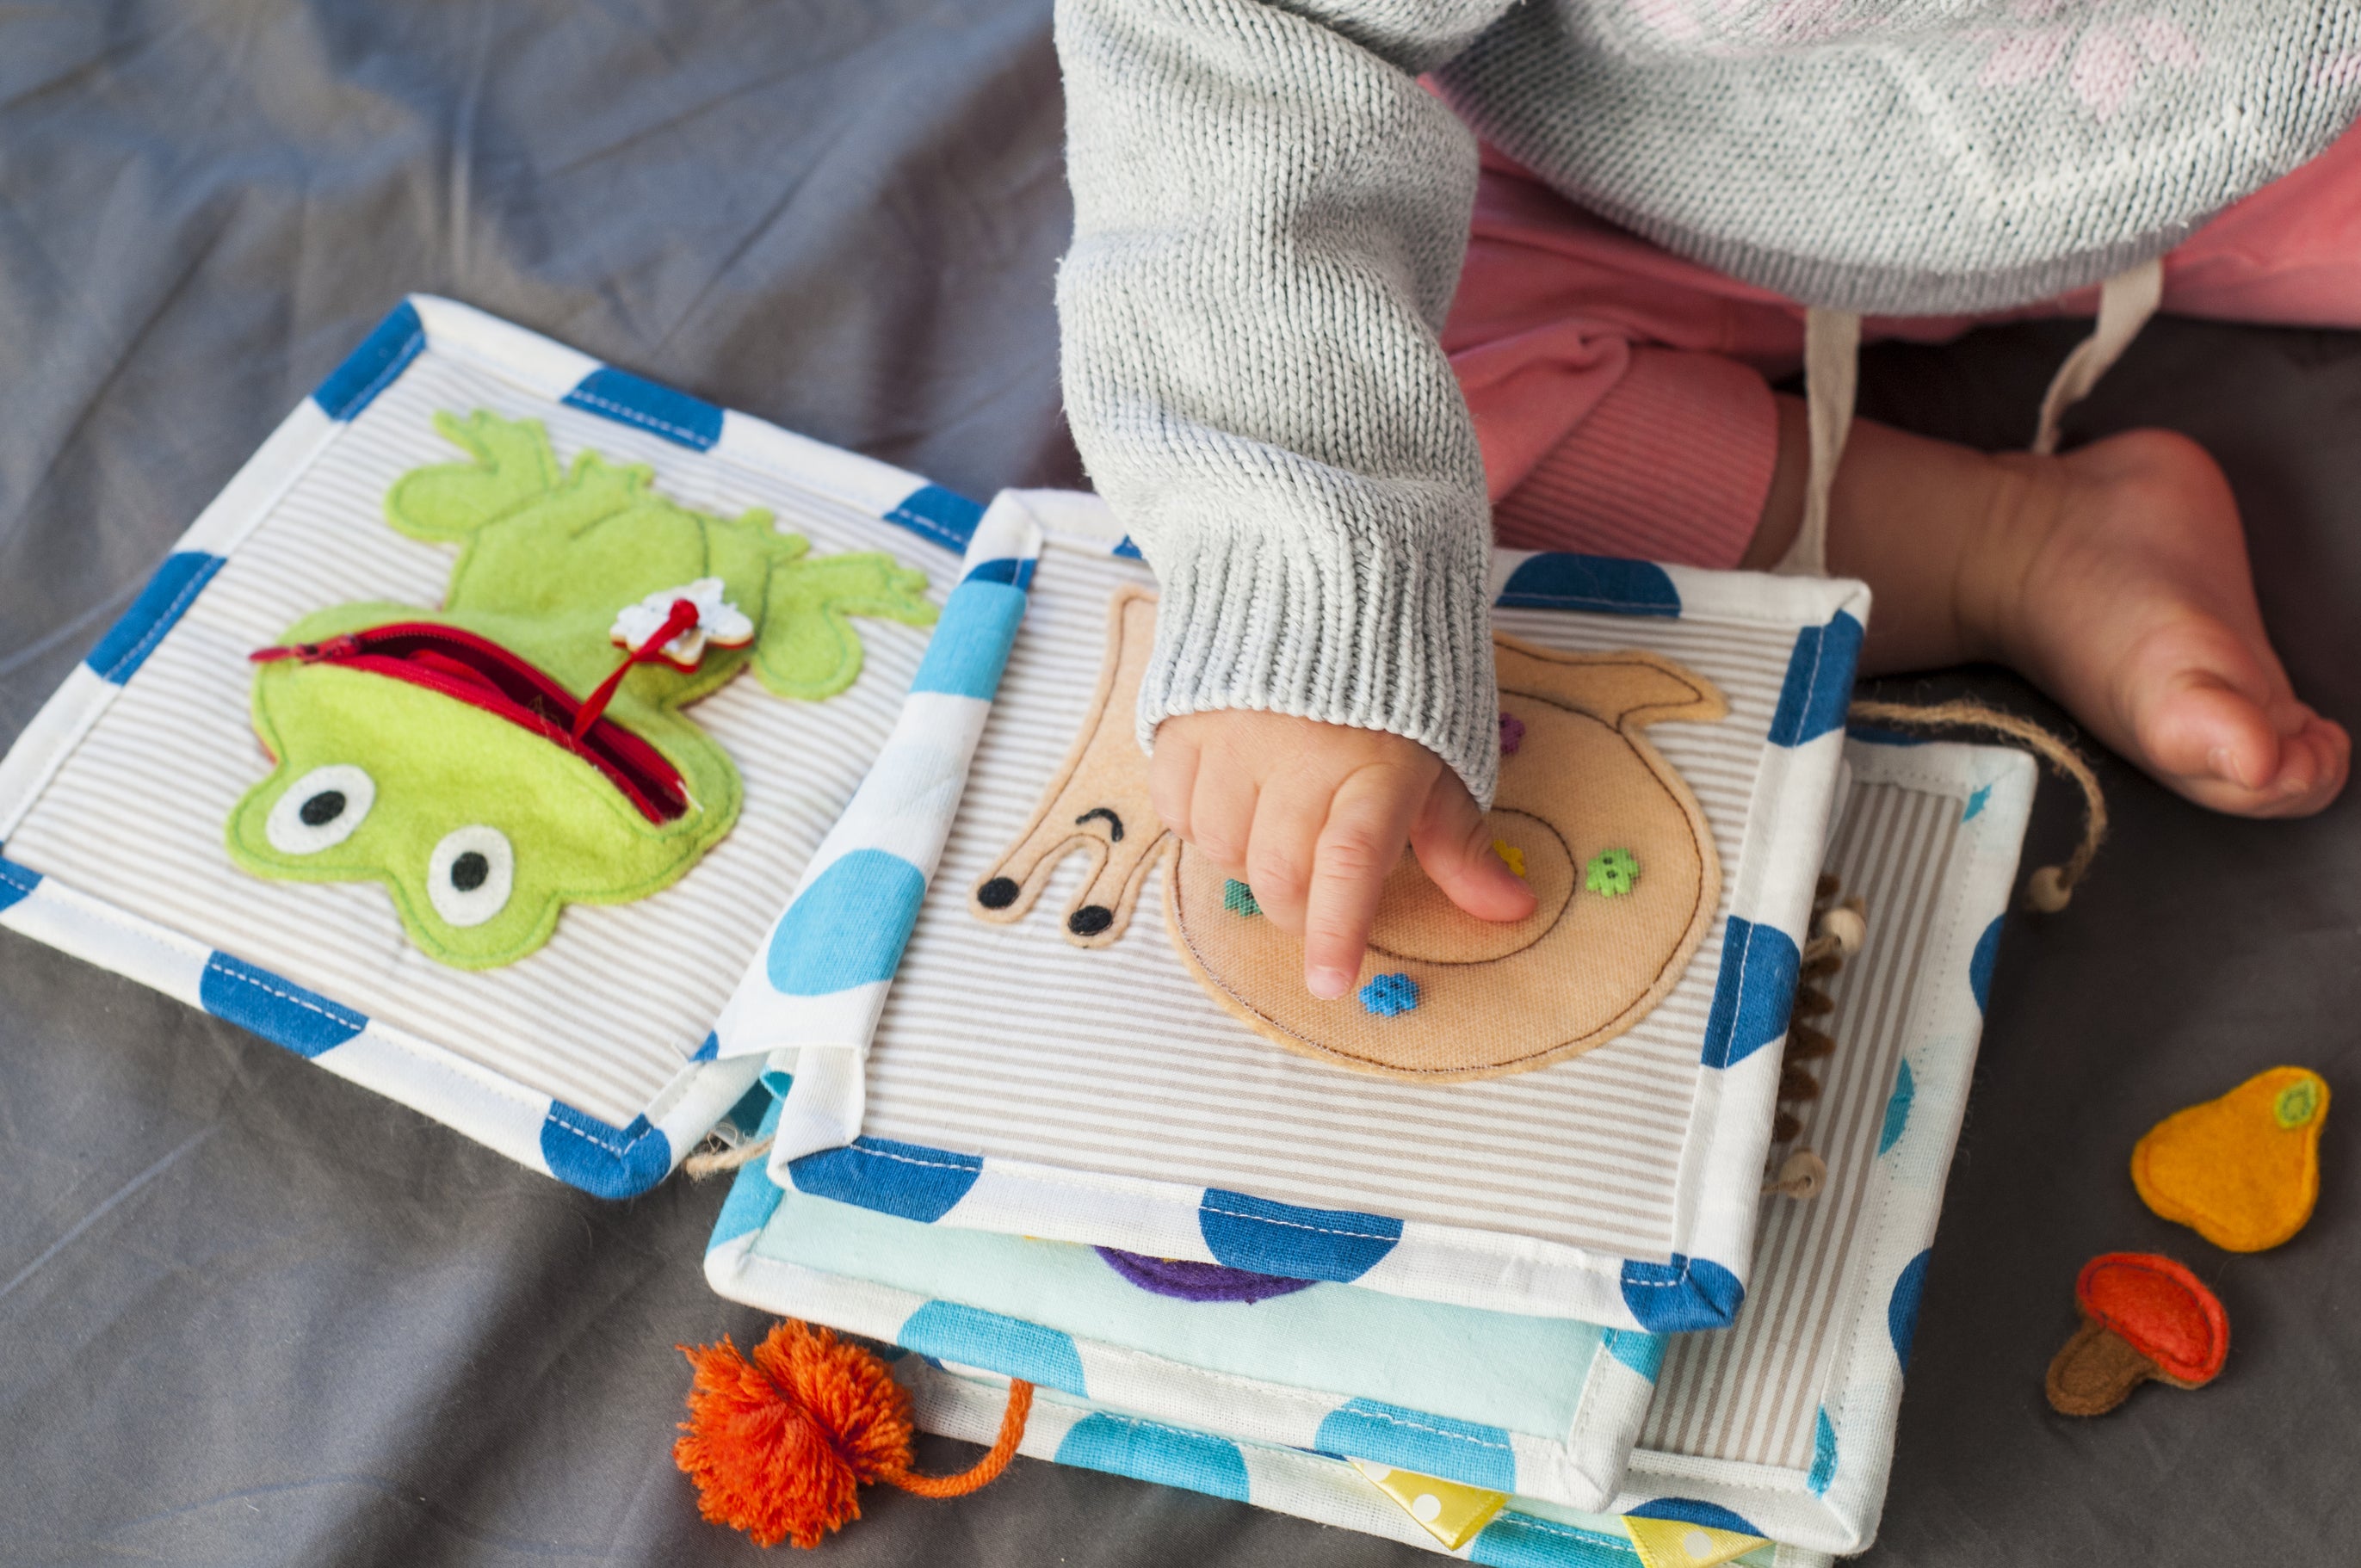 A baby touches and explores a DIY baby felt book with a frog and snail visible on the pages